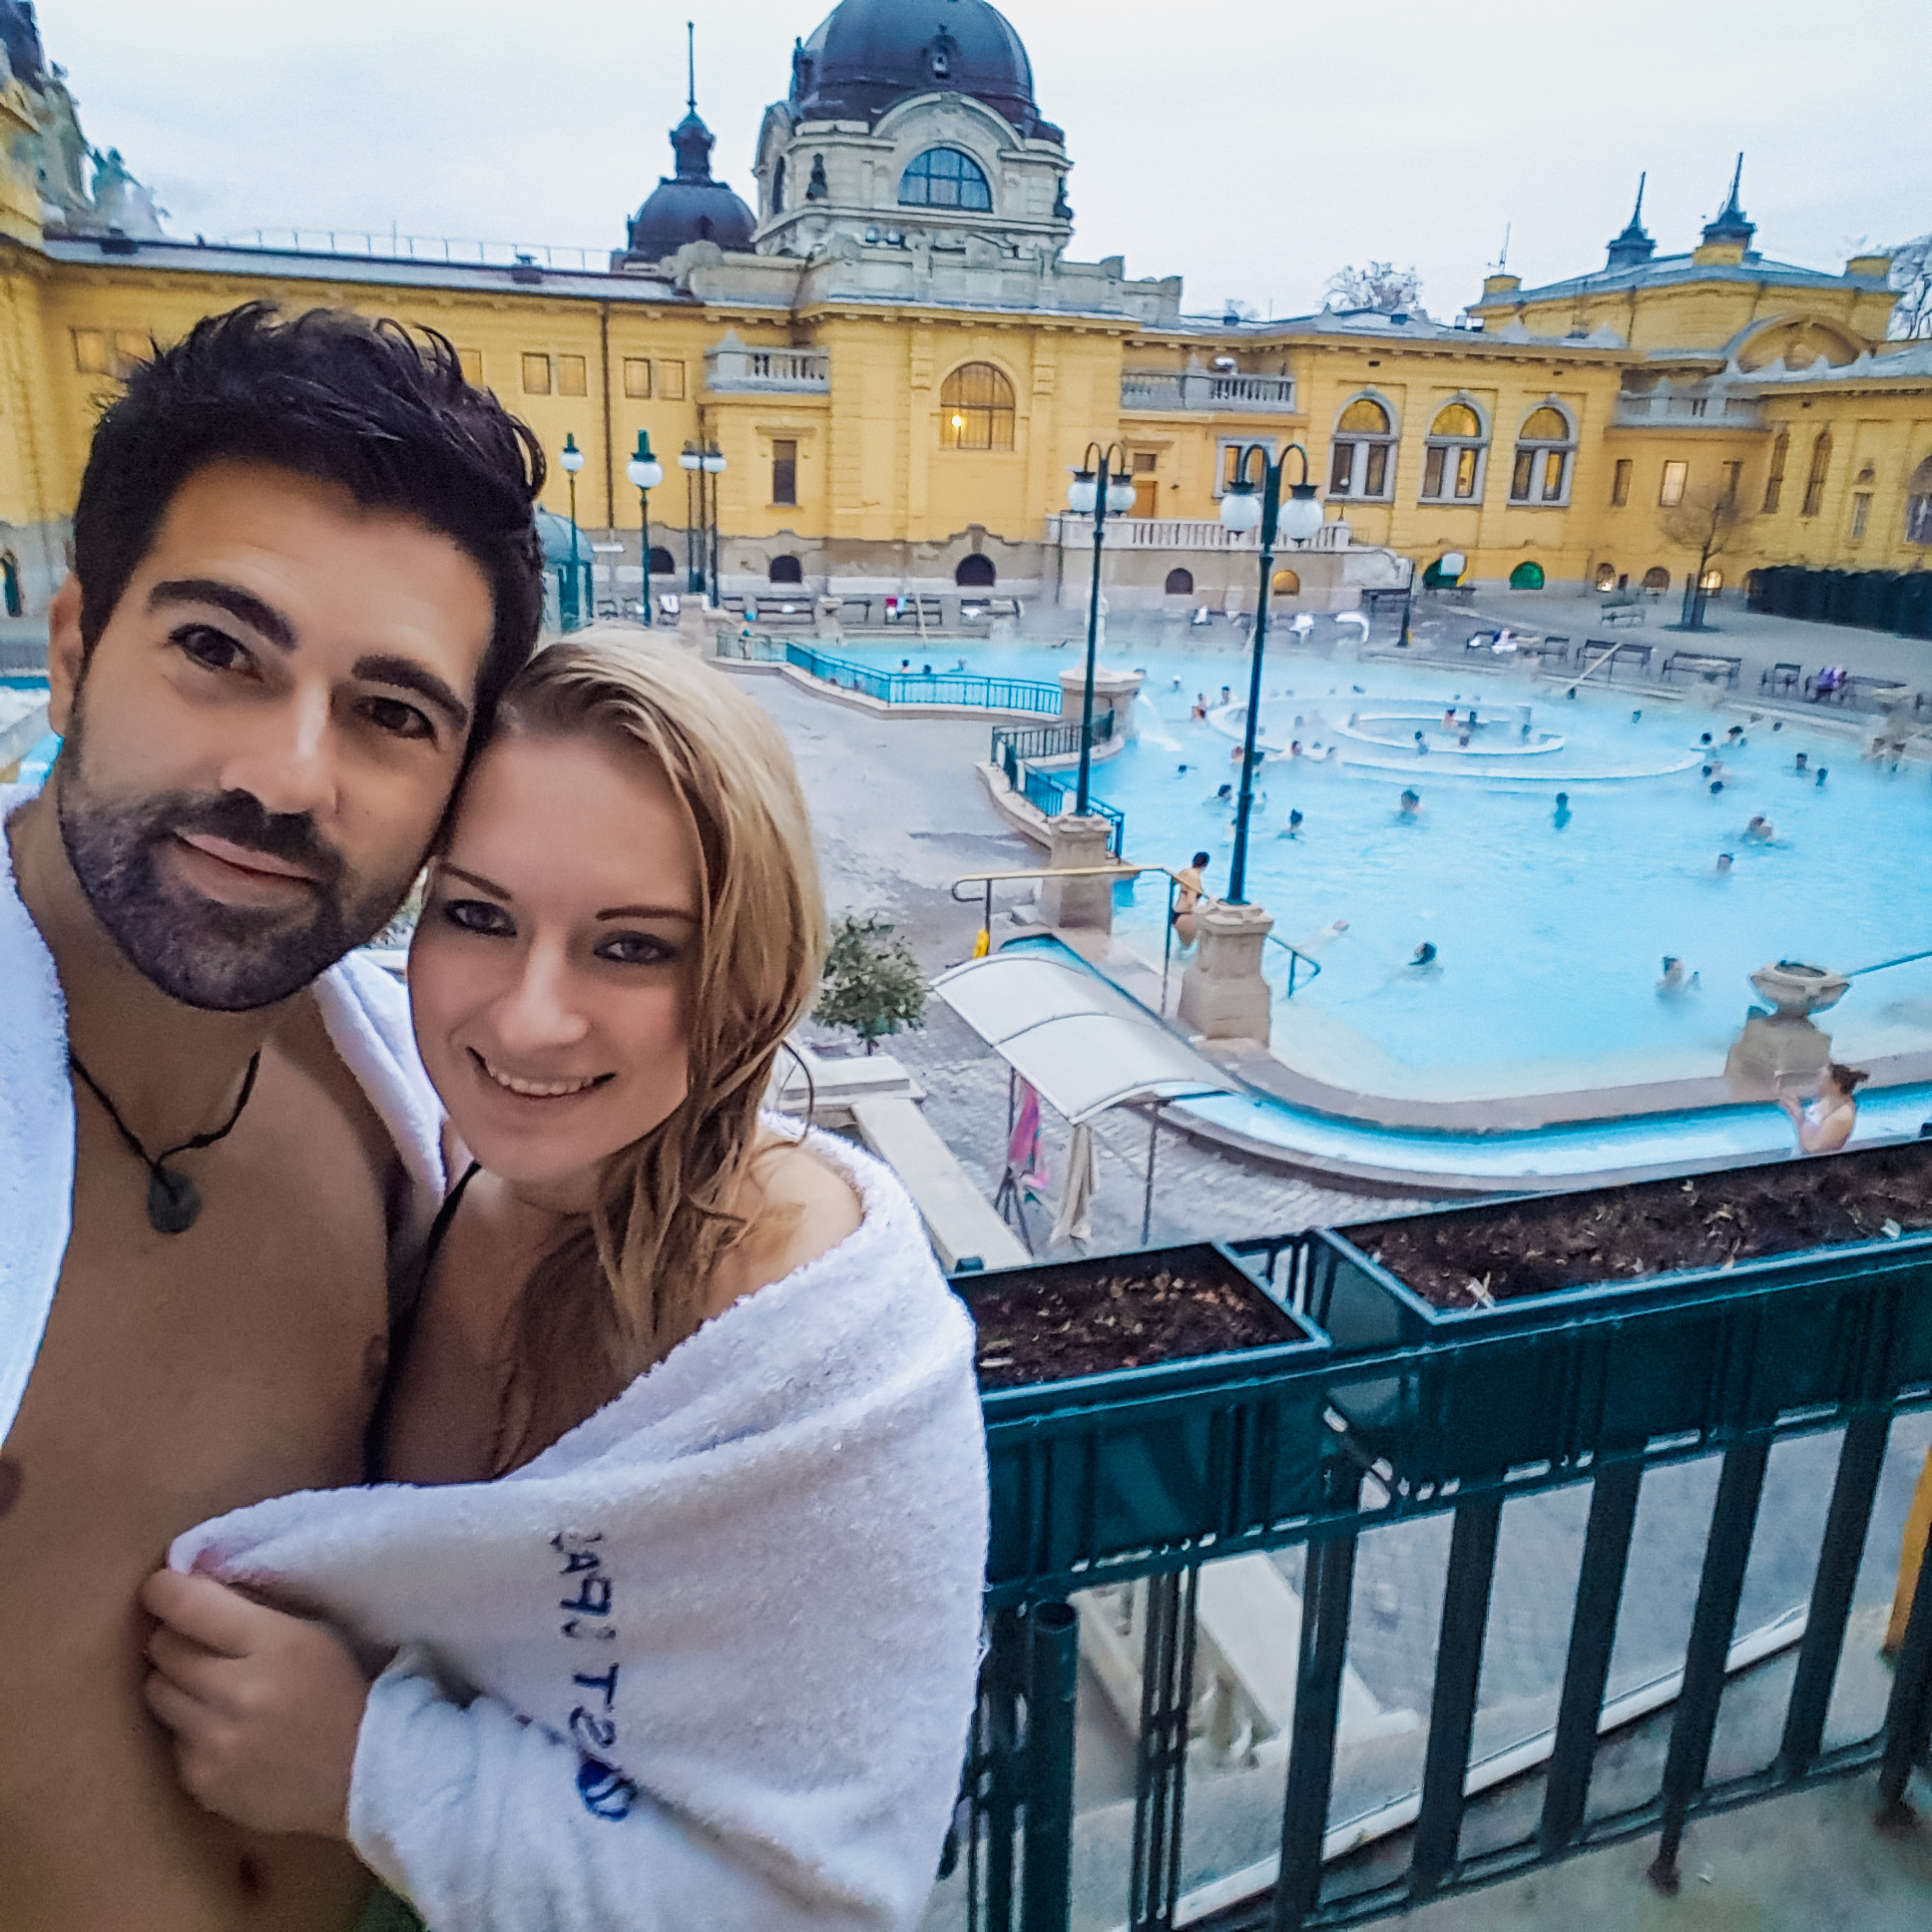 Couple enjoying the Széchenyi Thermal Bath spa in Budapest